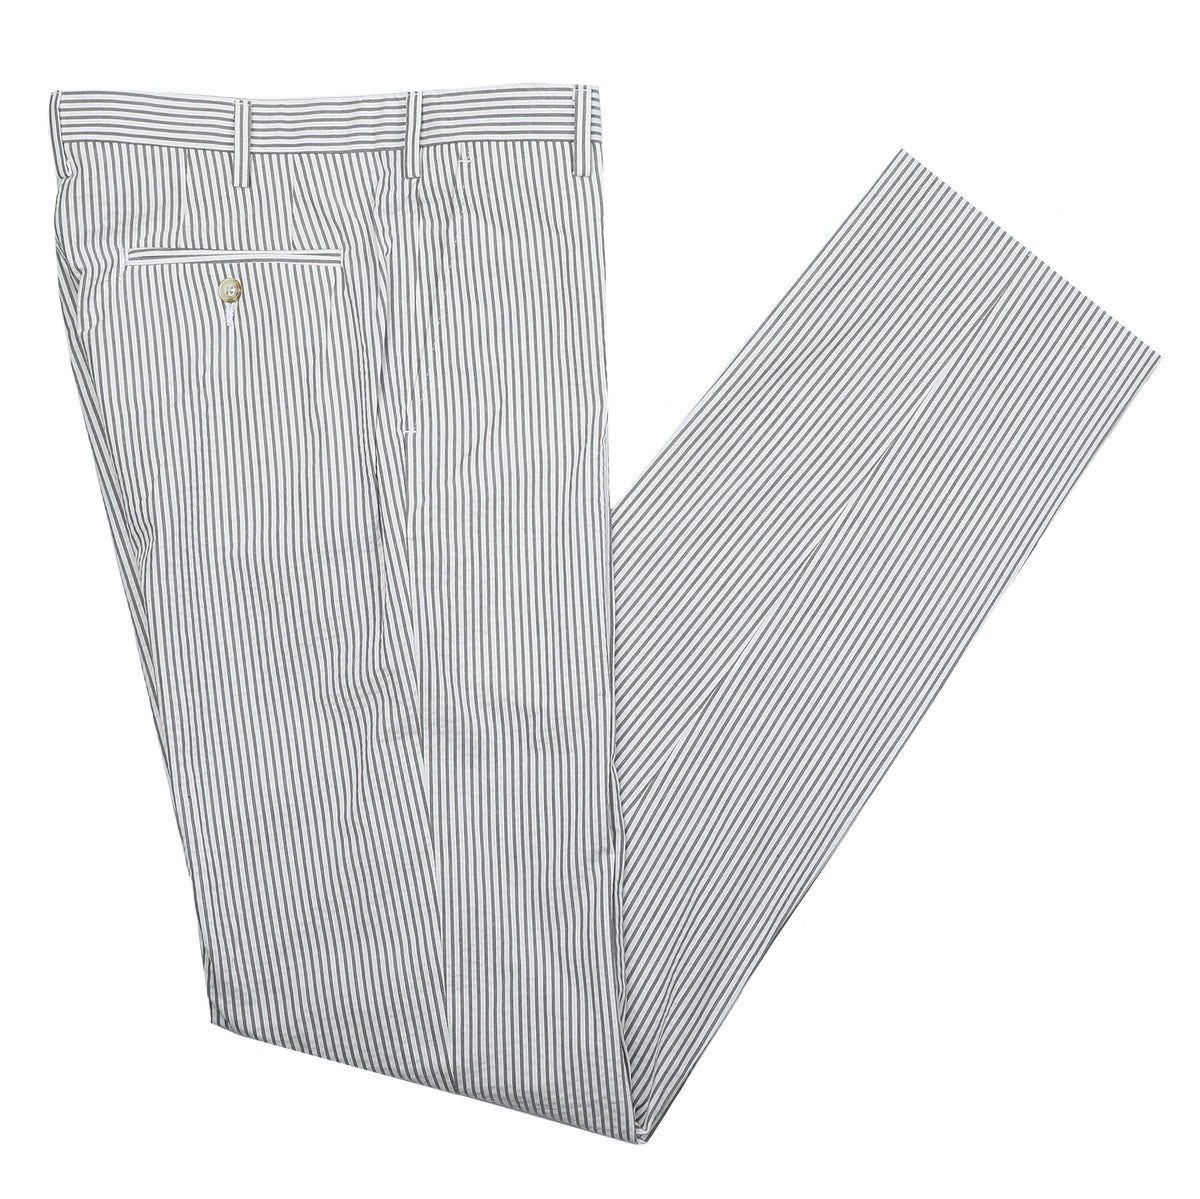 Experience the breezy, classic charm of our Algiers Gray / White Seersucker Pant. These stunning New Orleans-inspired trousers are perfect for your next summer outing. Cut from lightweight seersucker fabric, they combine timeless Tan and White stripes with a relaxed fit for unbeatable comfort and style. Try them this season for a look that radiates effortless elegance!  100% Cotton Seersucker • Algiers Fit • Flat Front • Tab Button Closure • Unfinished Bottom (37.5&quot;) • Dry Clean • Imported